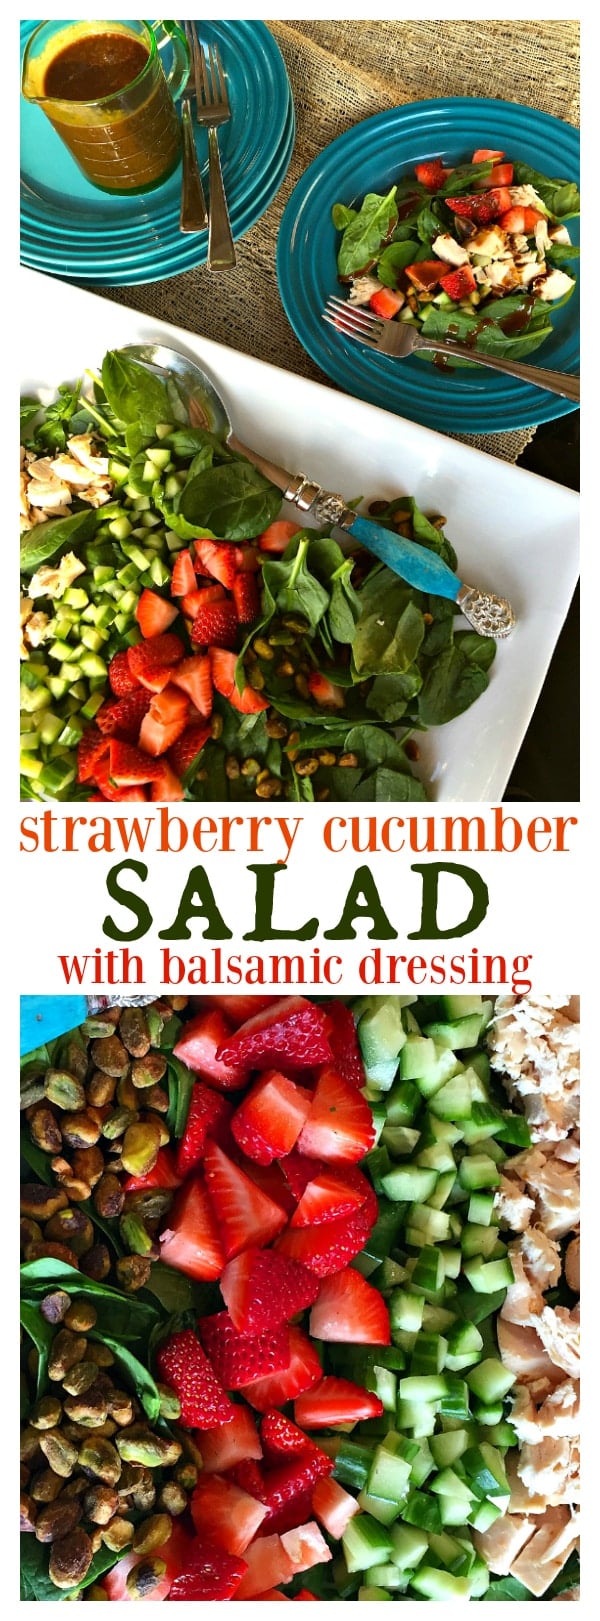 Strawberry Cucumber Salad with Preserves Balsamic Dressing